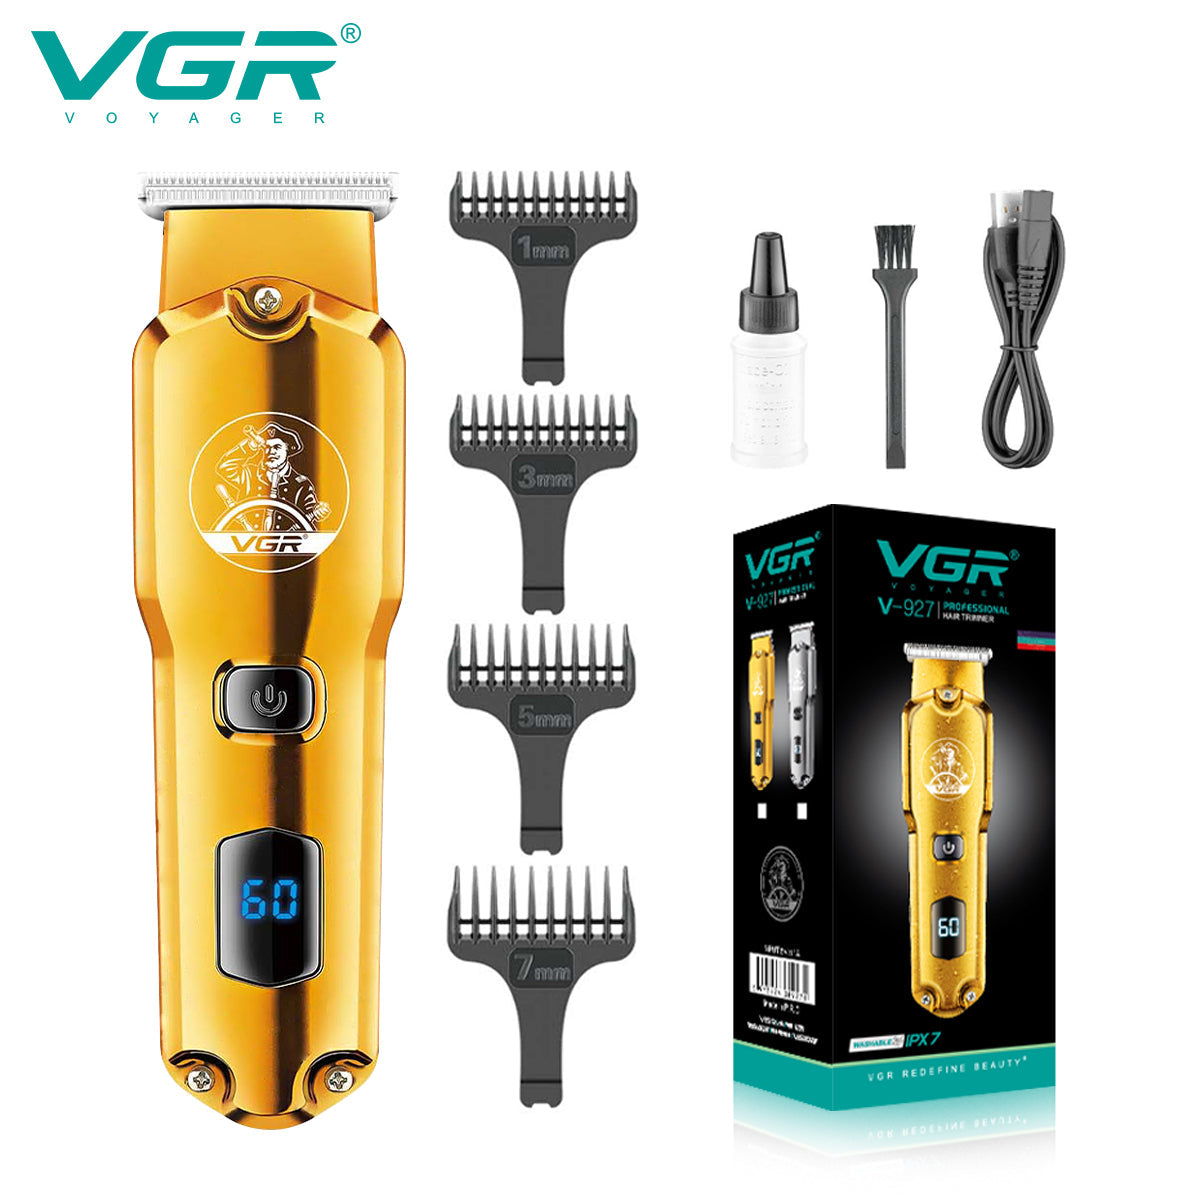 VGR V-927 Hair Trimmer Professional Trimmer Electric Hair Clipper Cordless Zero Cut Machine Rechargeable Waterproof LED Display